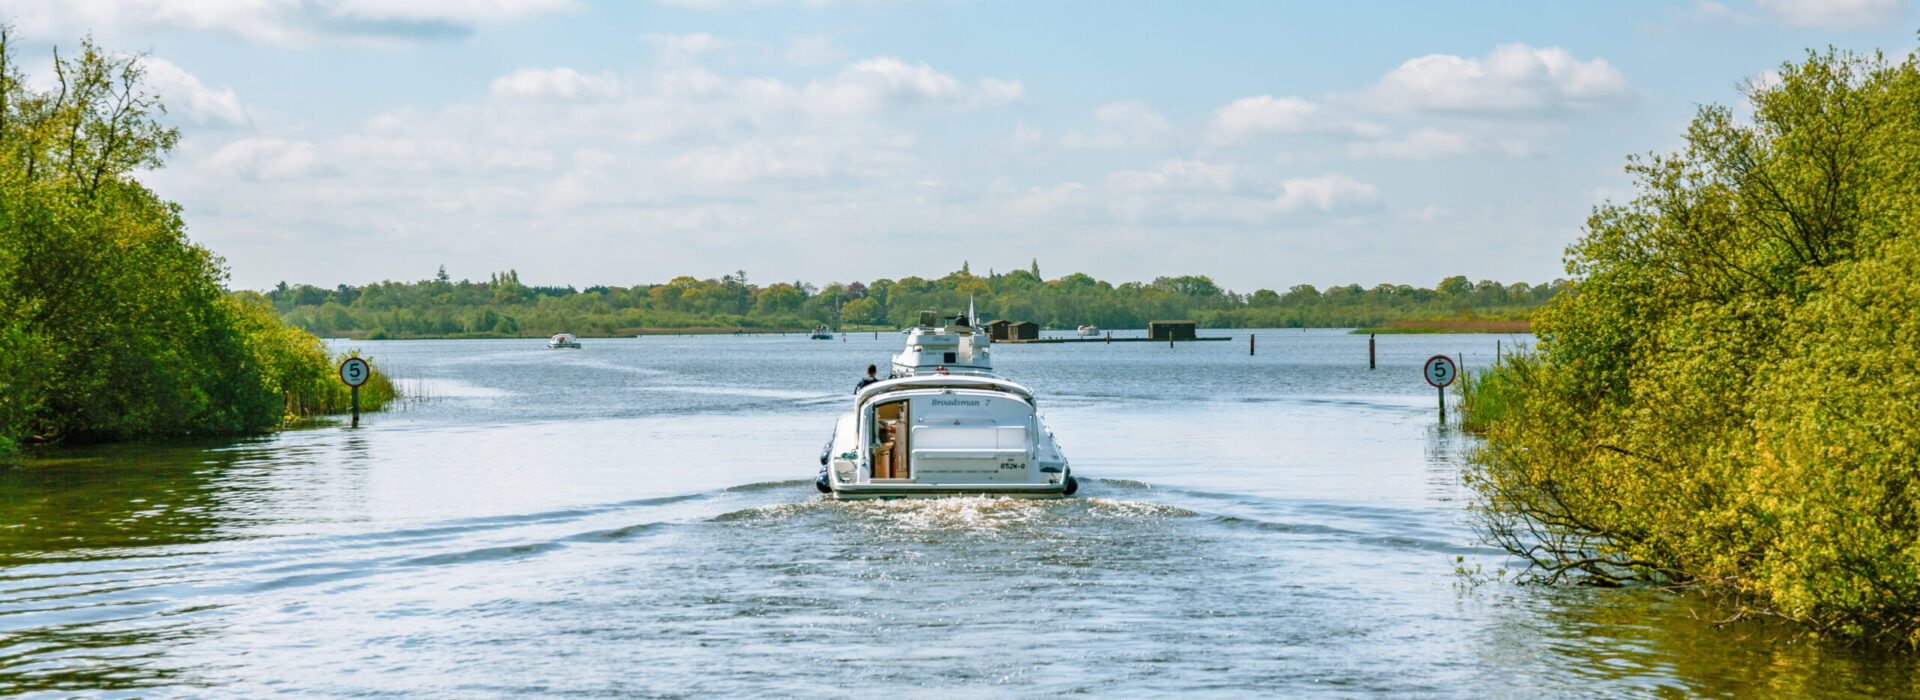 10 Things Only Those Who’ve Been to the Broads National Park Will Know